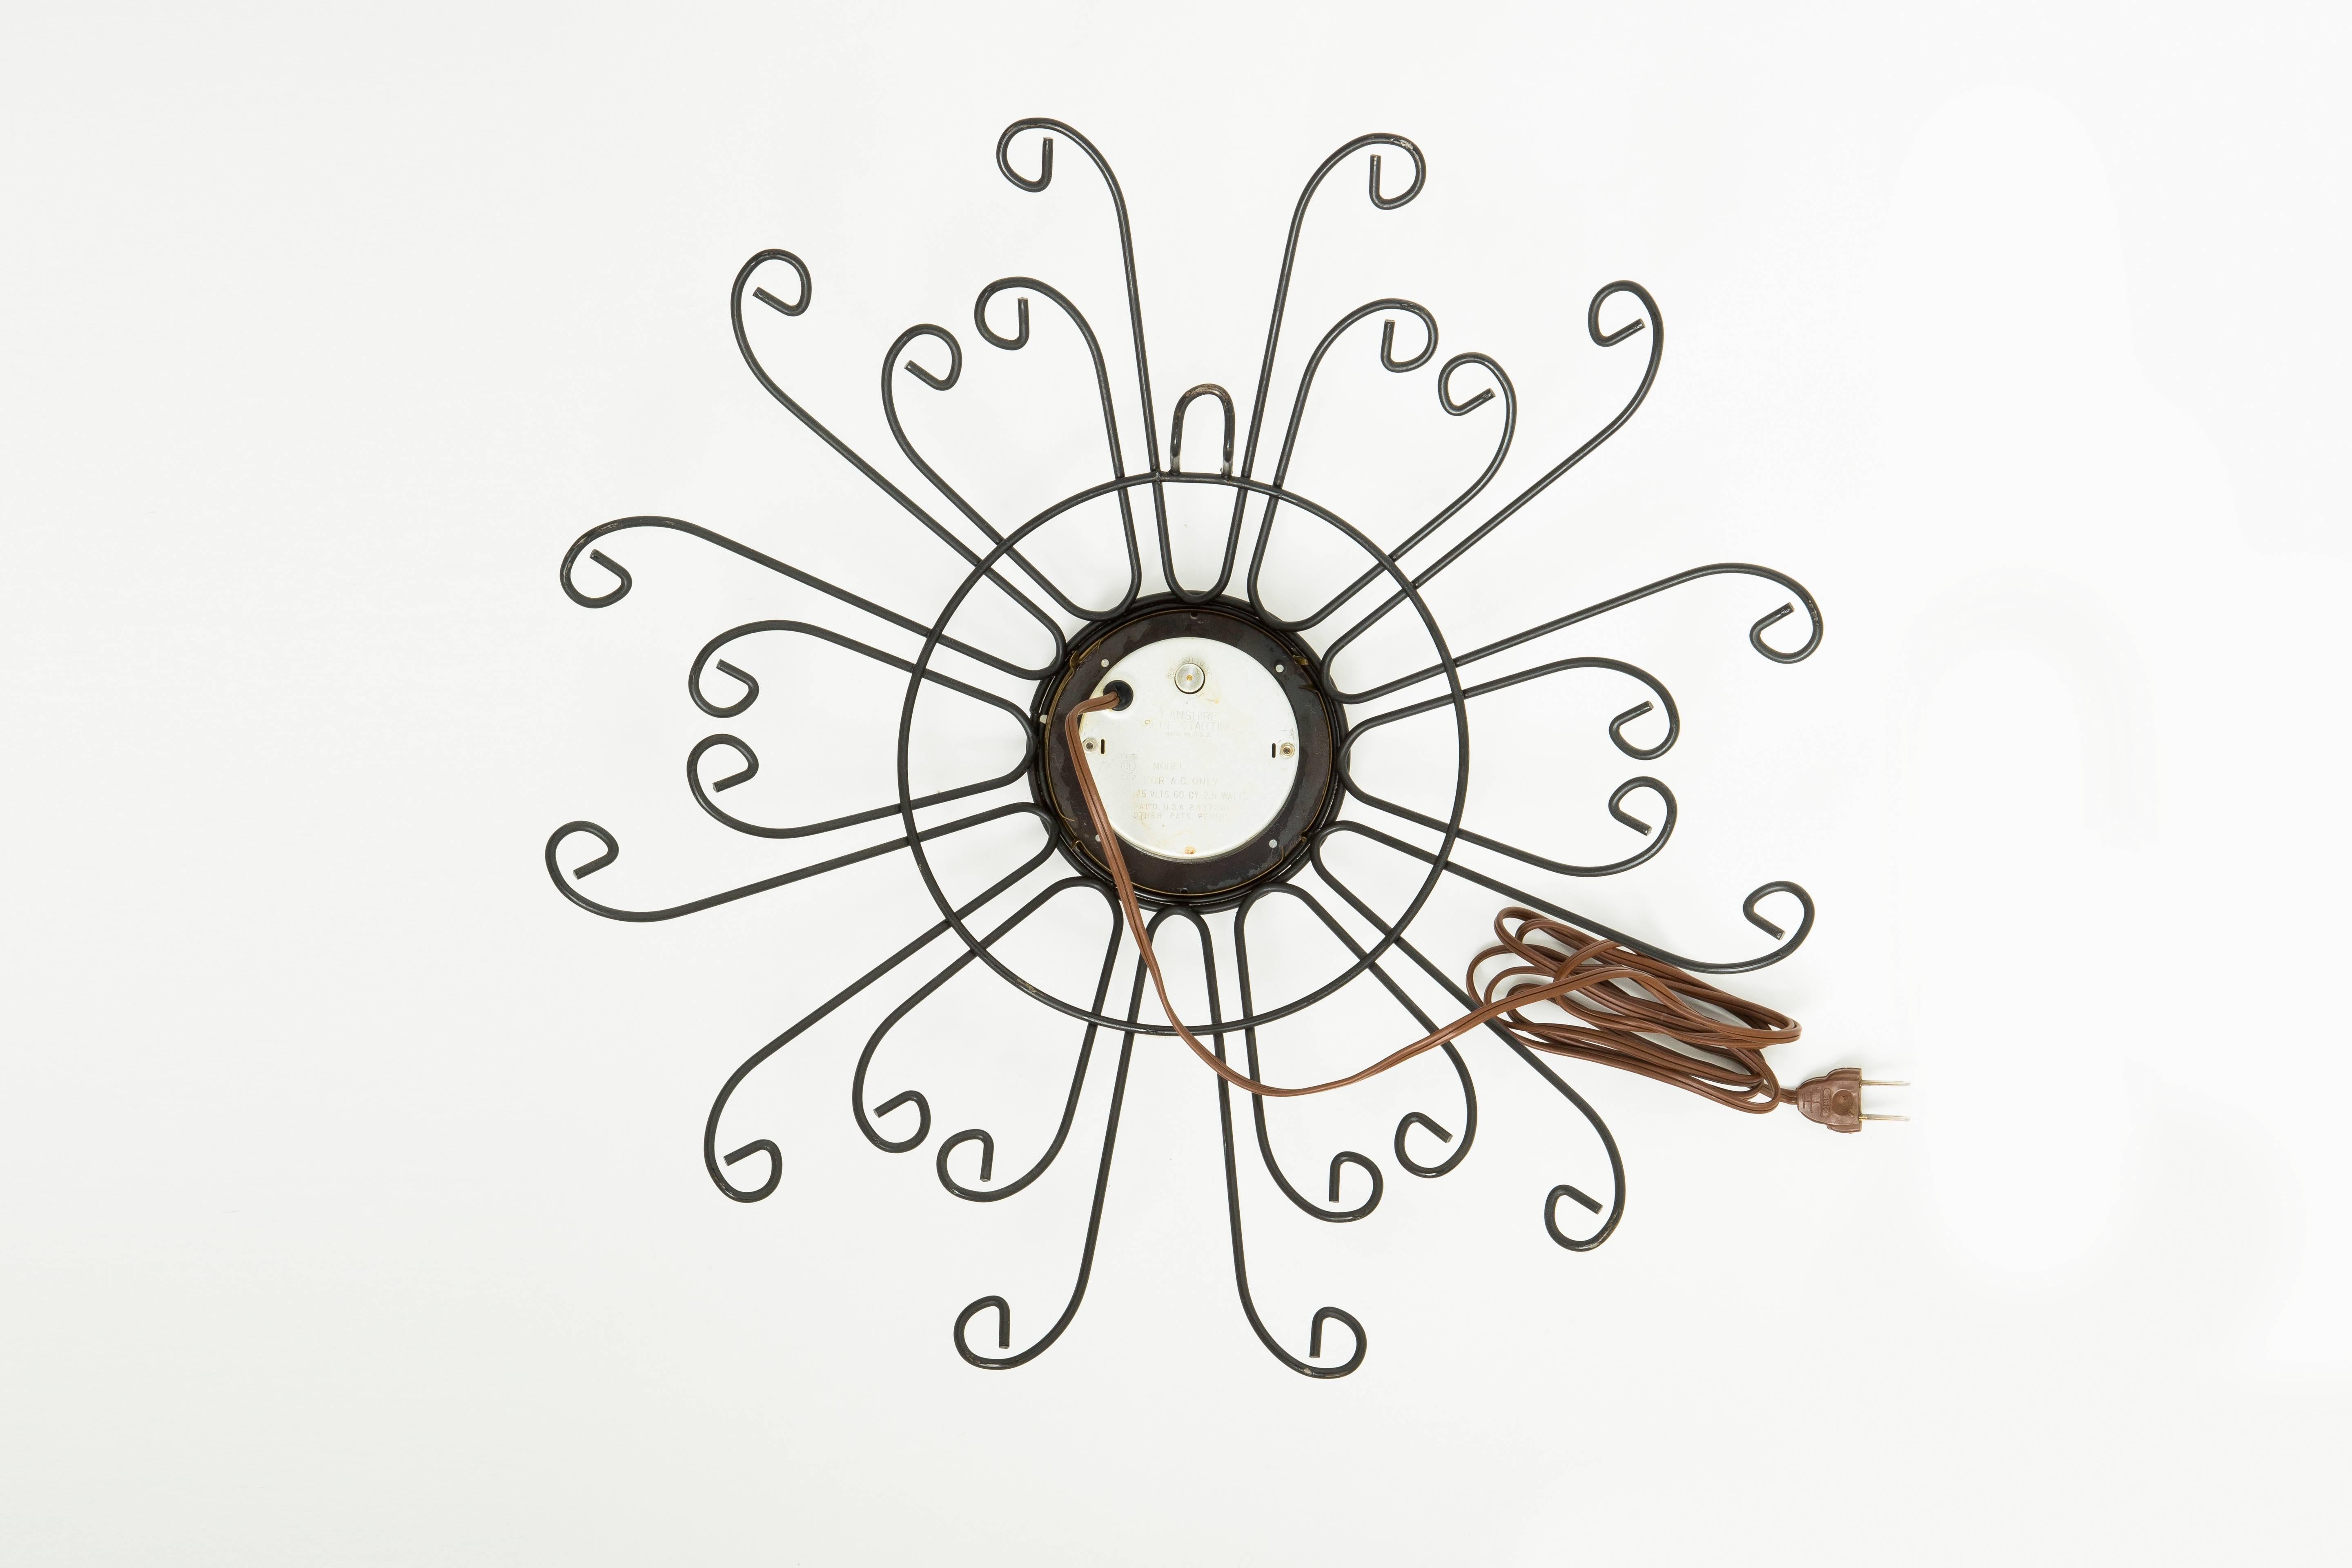 Wonderful ornamental starburst clock by Lanshire. Featuring curled powder coated sunbeams that decorate the perimeter. Roman numerals, electric cord and plug.

The archetypal design makes this clock appropriate for a number of locations, from